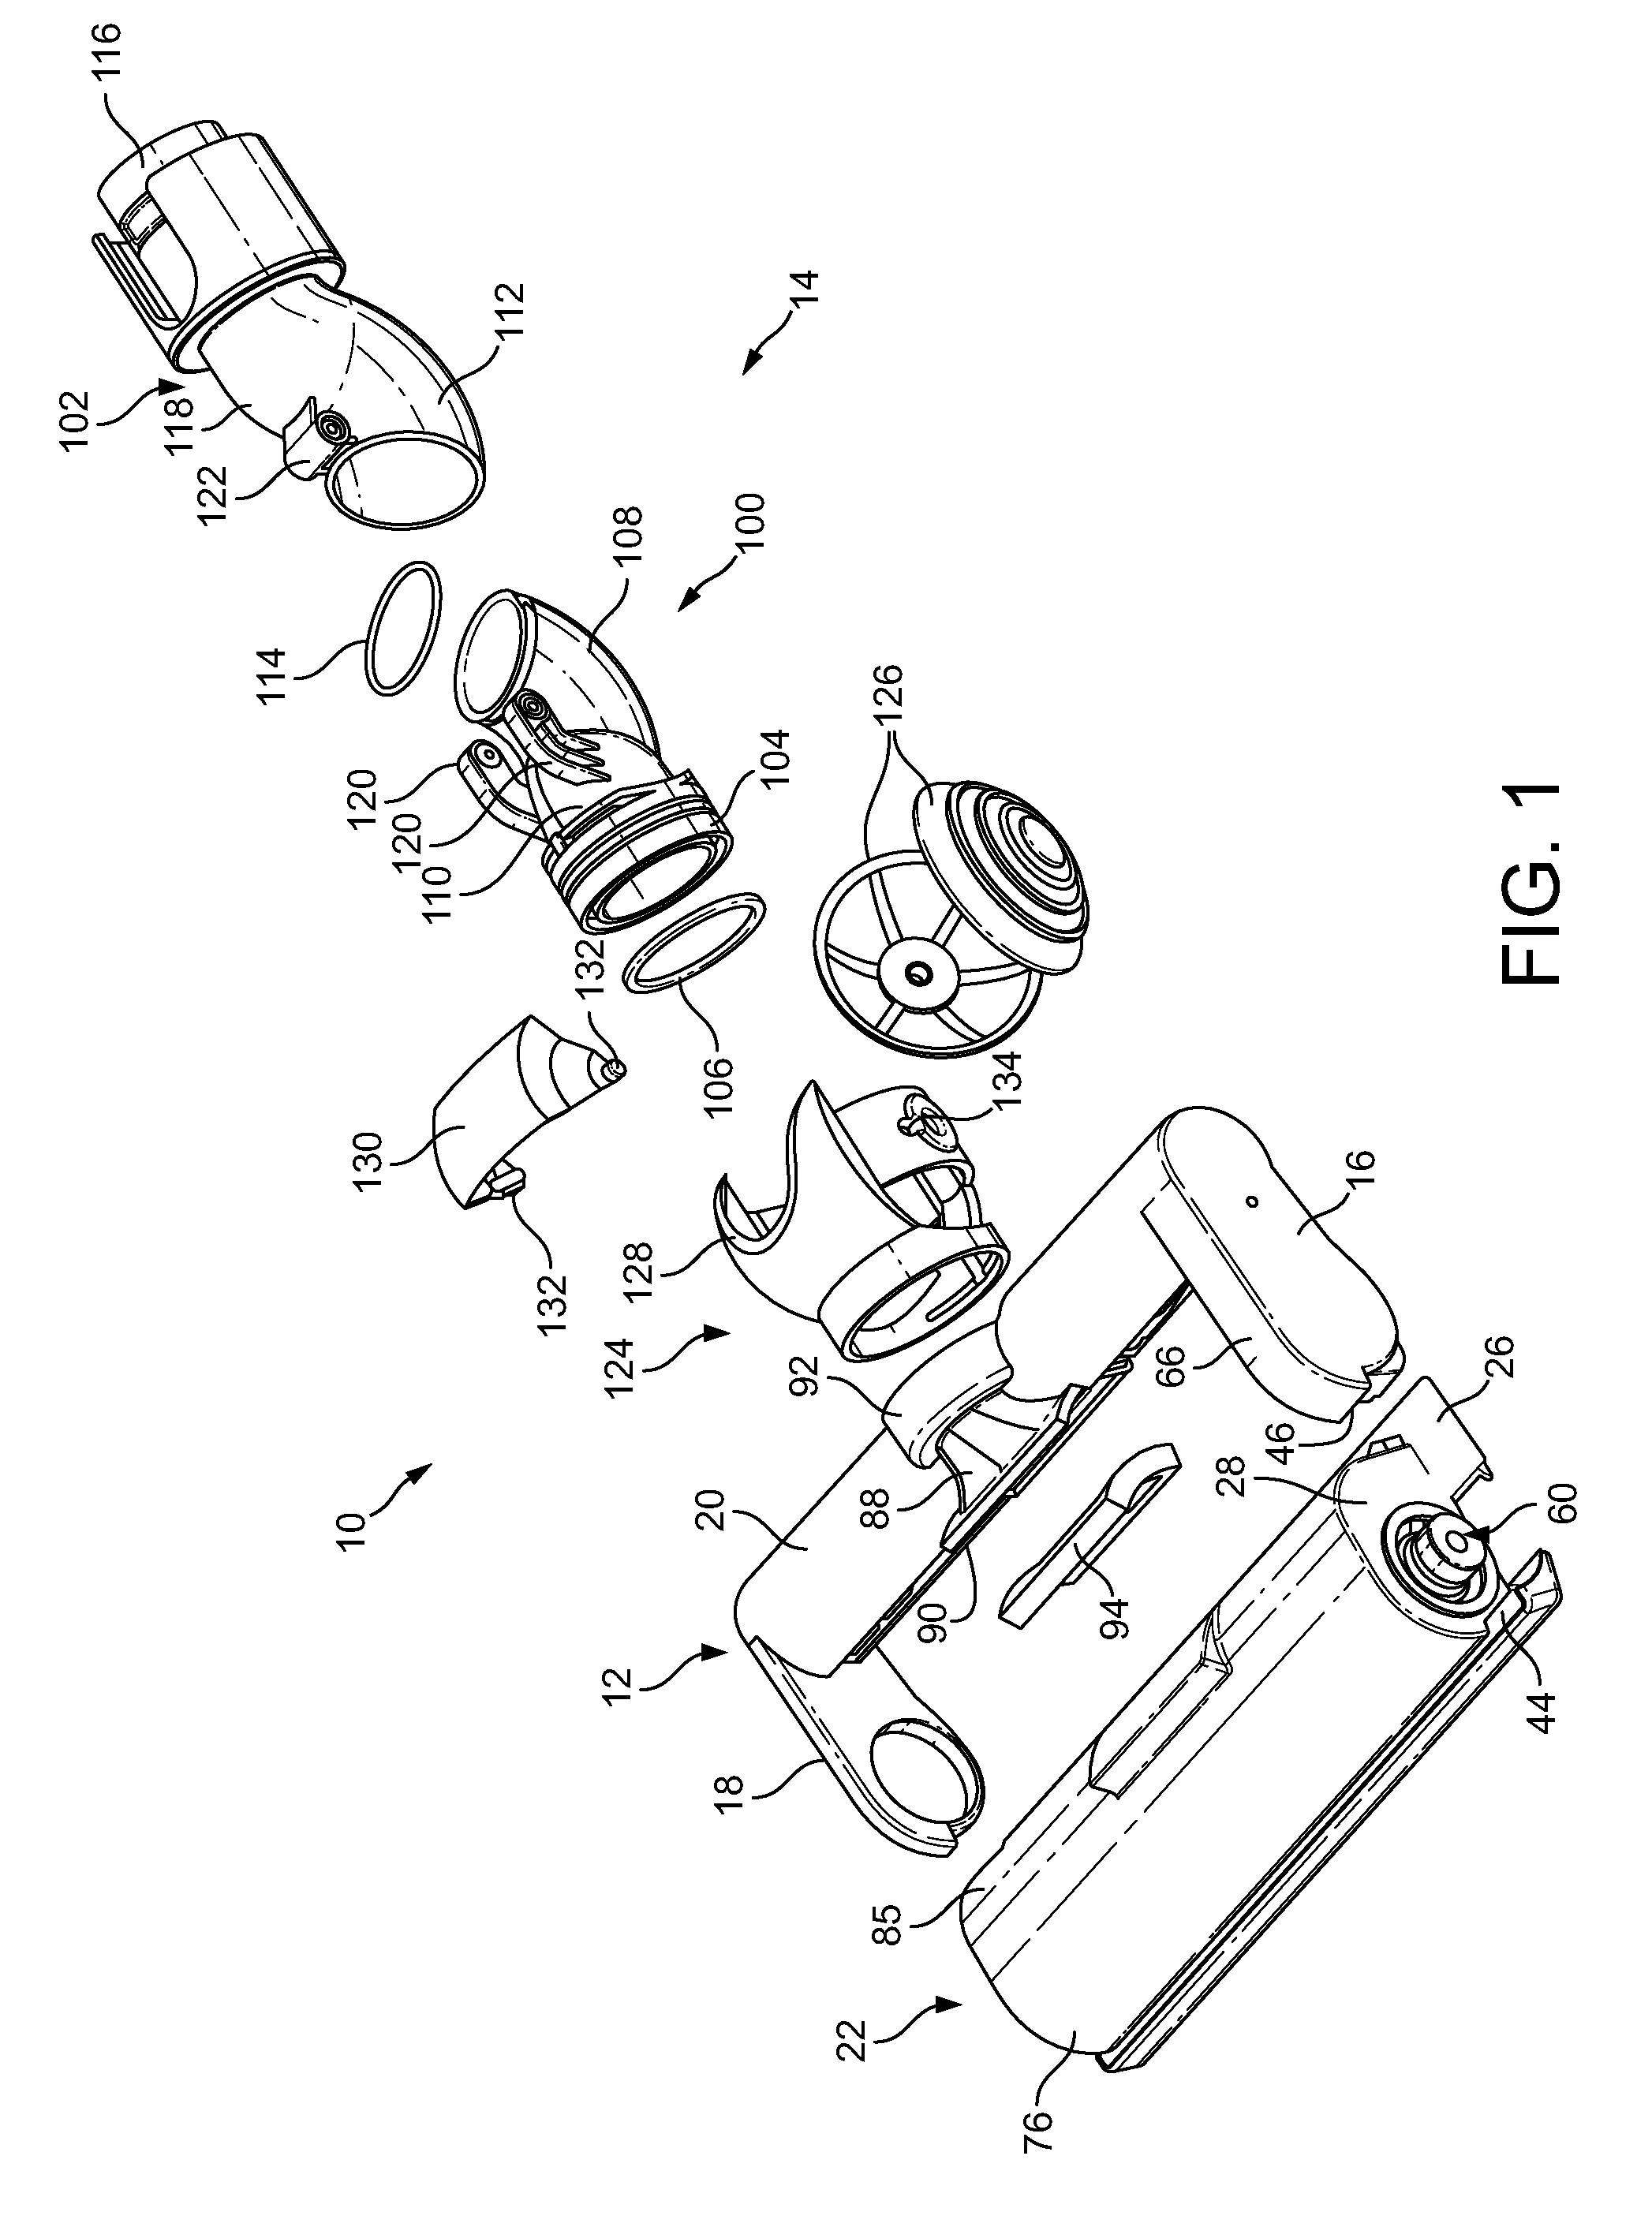 Cleaner head for a surface treating appliance